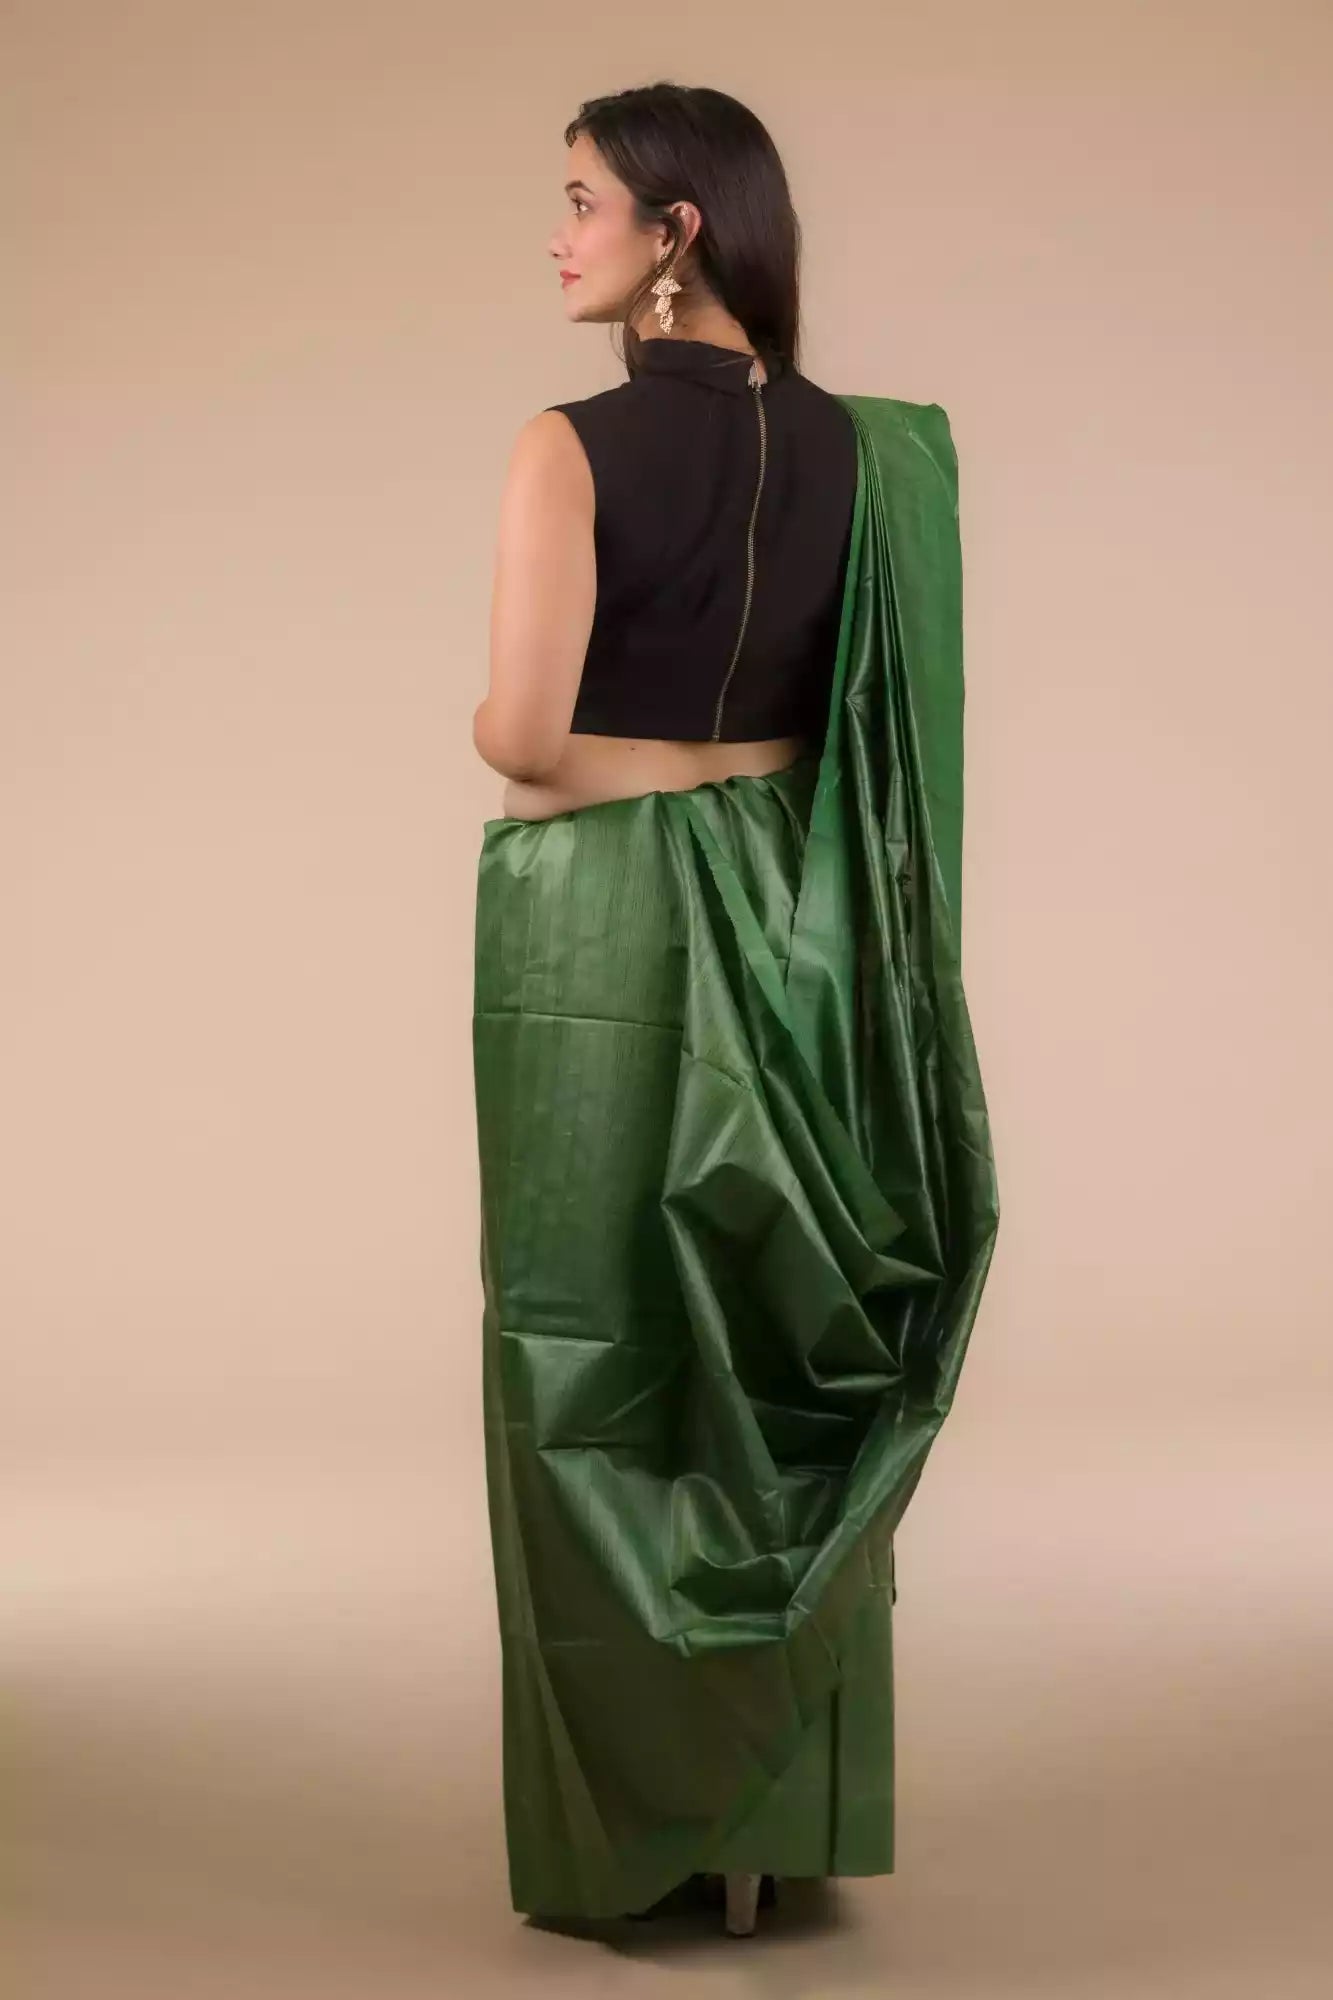 back view of a woman in ethnic posing wearing dark green saree with black blouse and heels